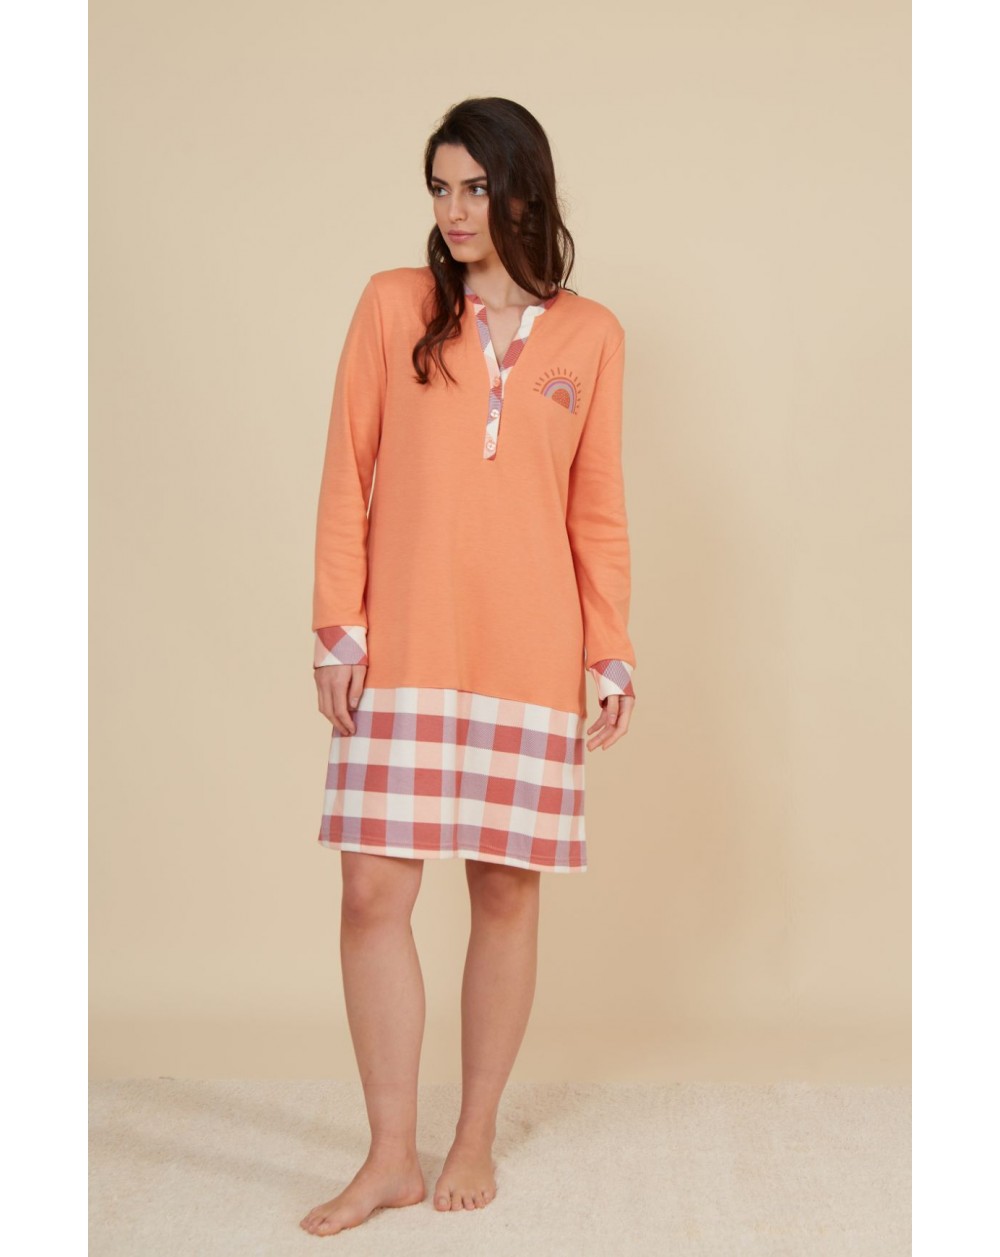 Women's nightdress combining plaid and checkered with plain 